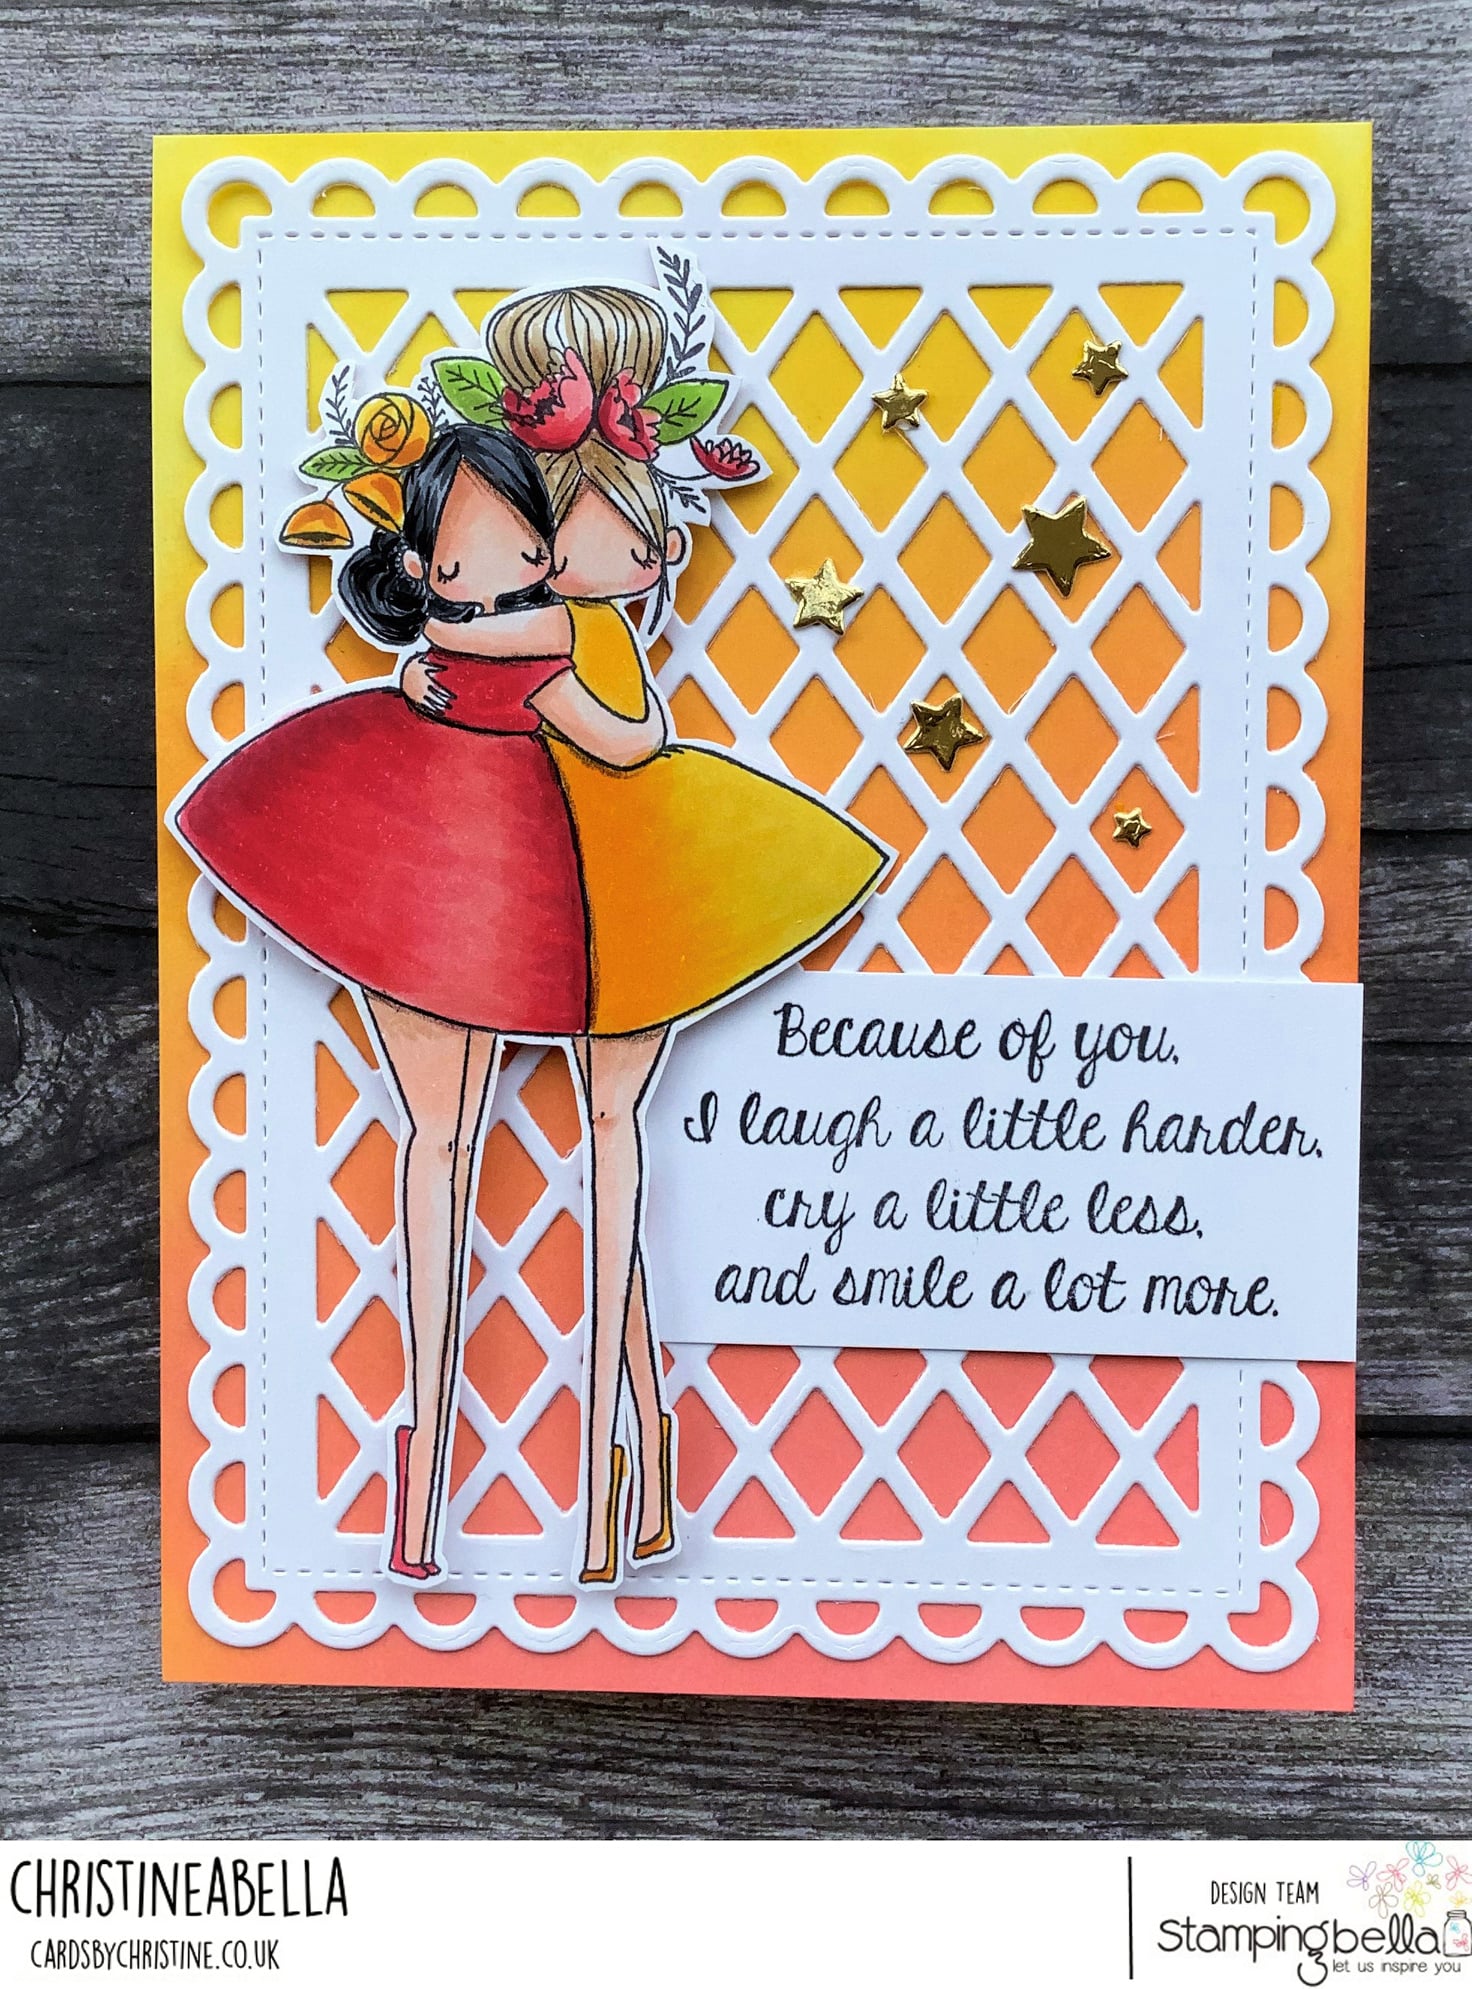 www.stampingbella.com: rubber stamp used: CURVY GIRL BESTIES card by CHRISTINE LEVISON